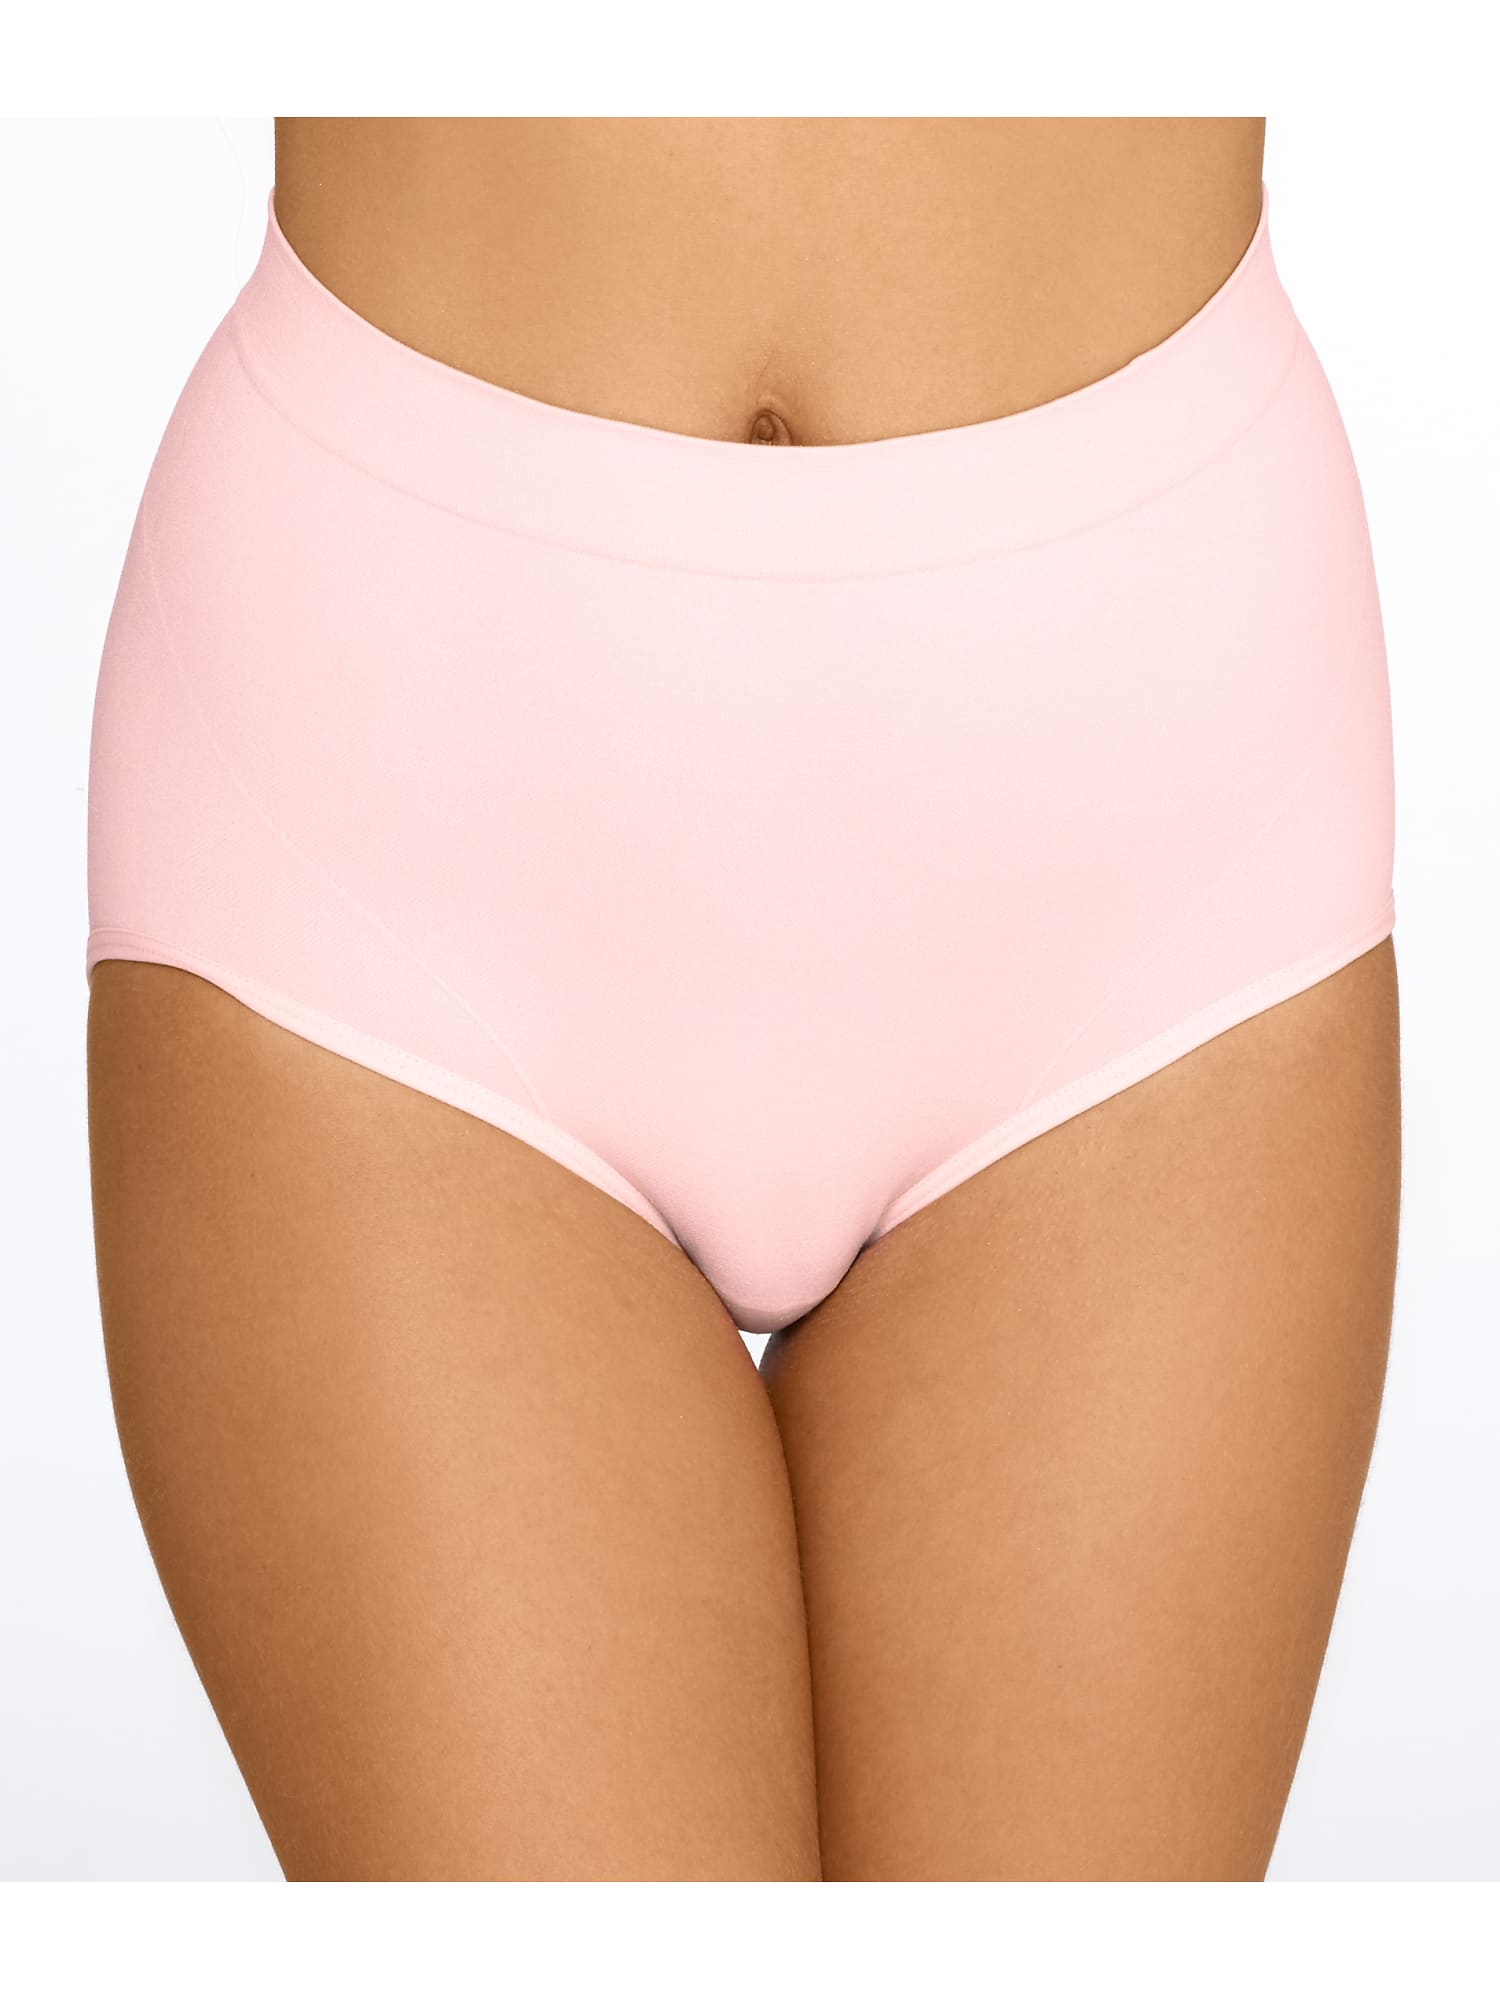 Smoothing Comfort Seamless Brief Panty